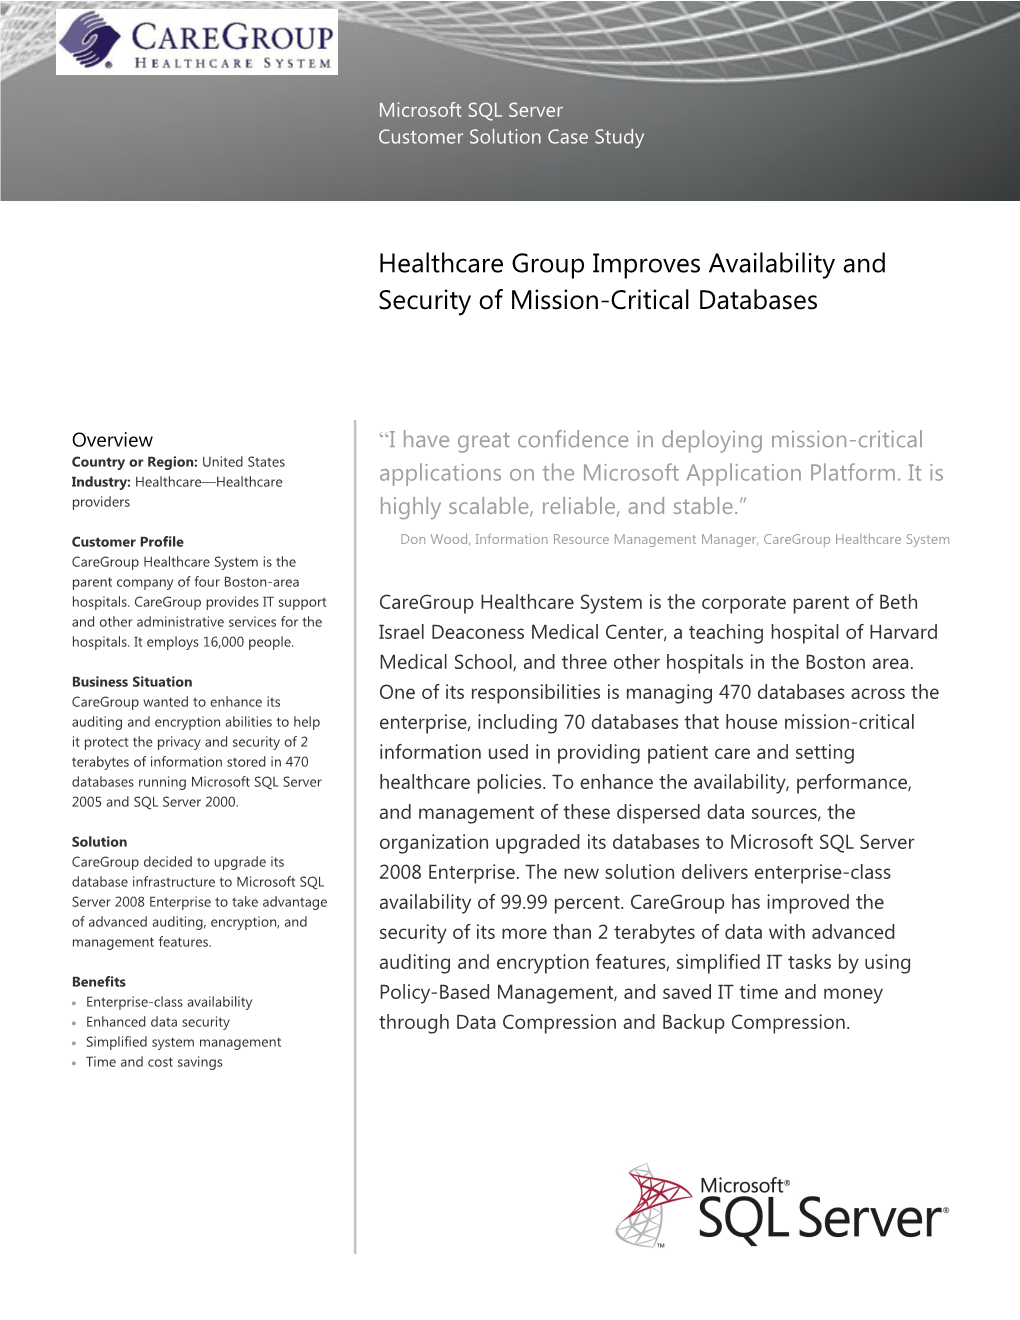 Healthcare Group Improves Availability and Security of Mission-Critical Databases